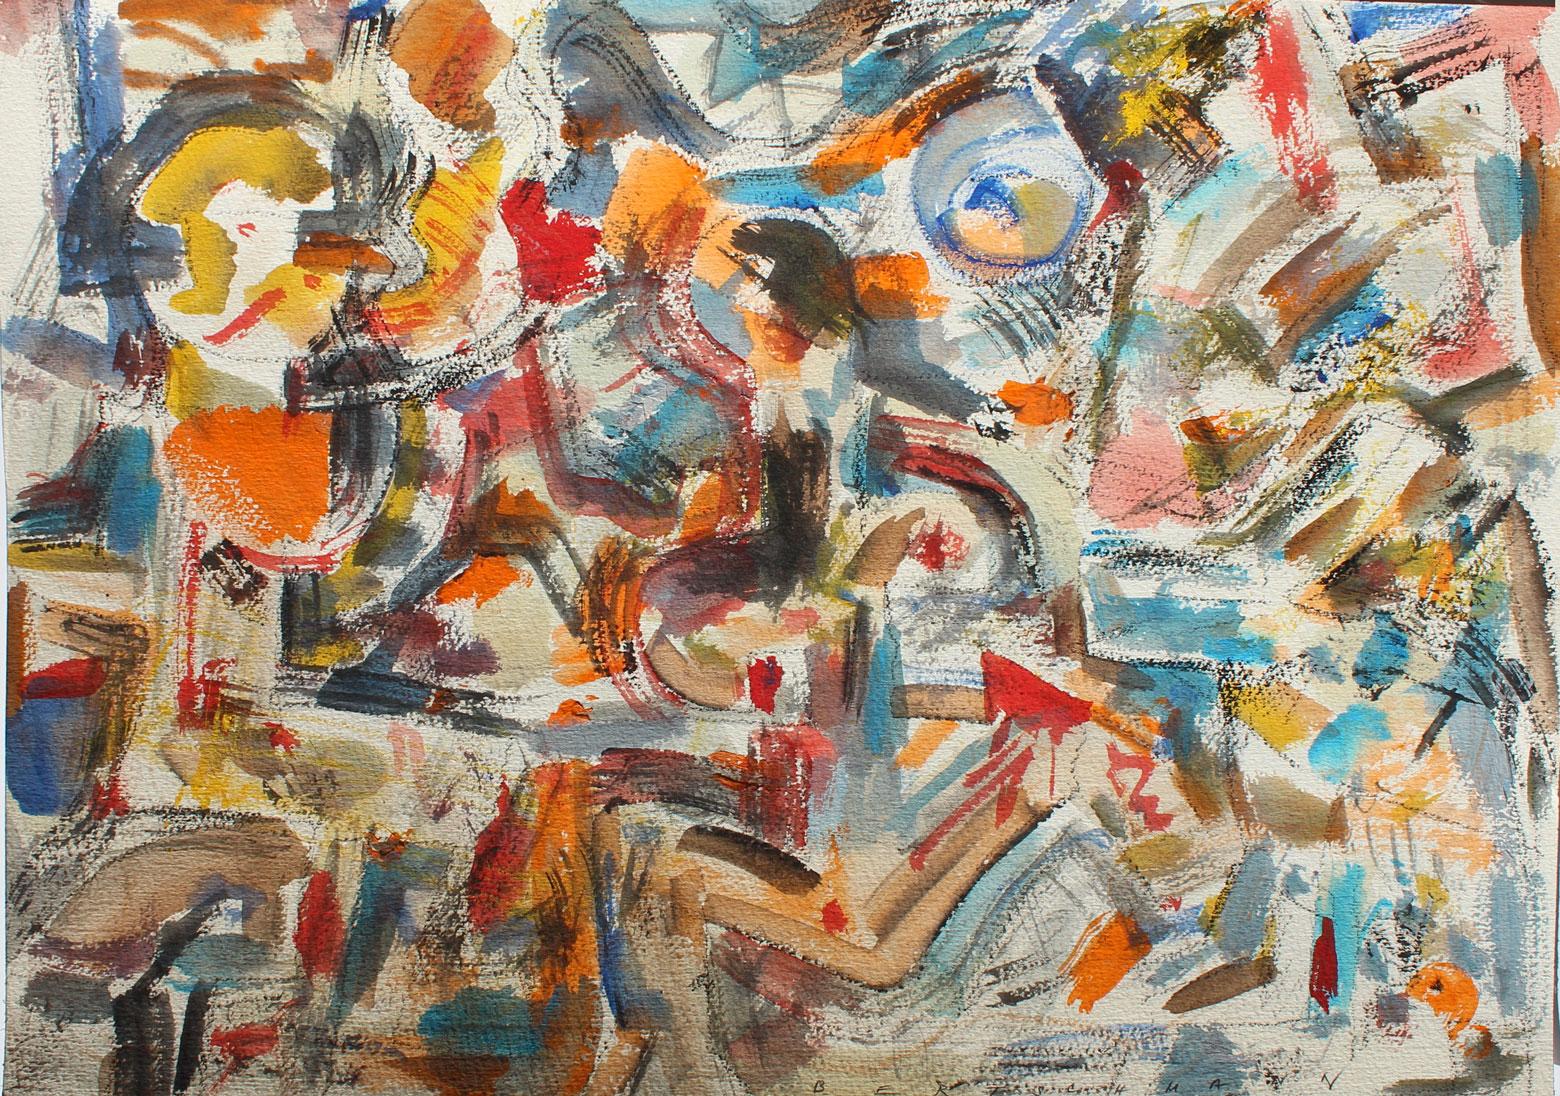  Abstract Expressionist Composition, 1990